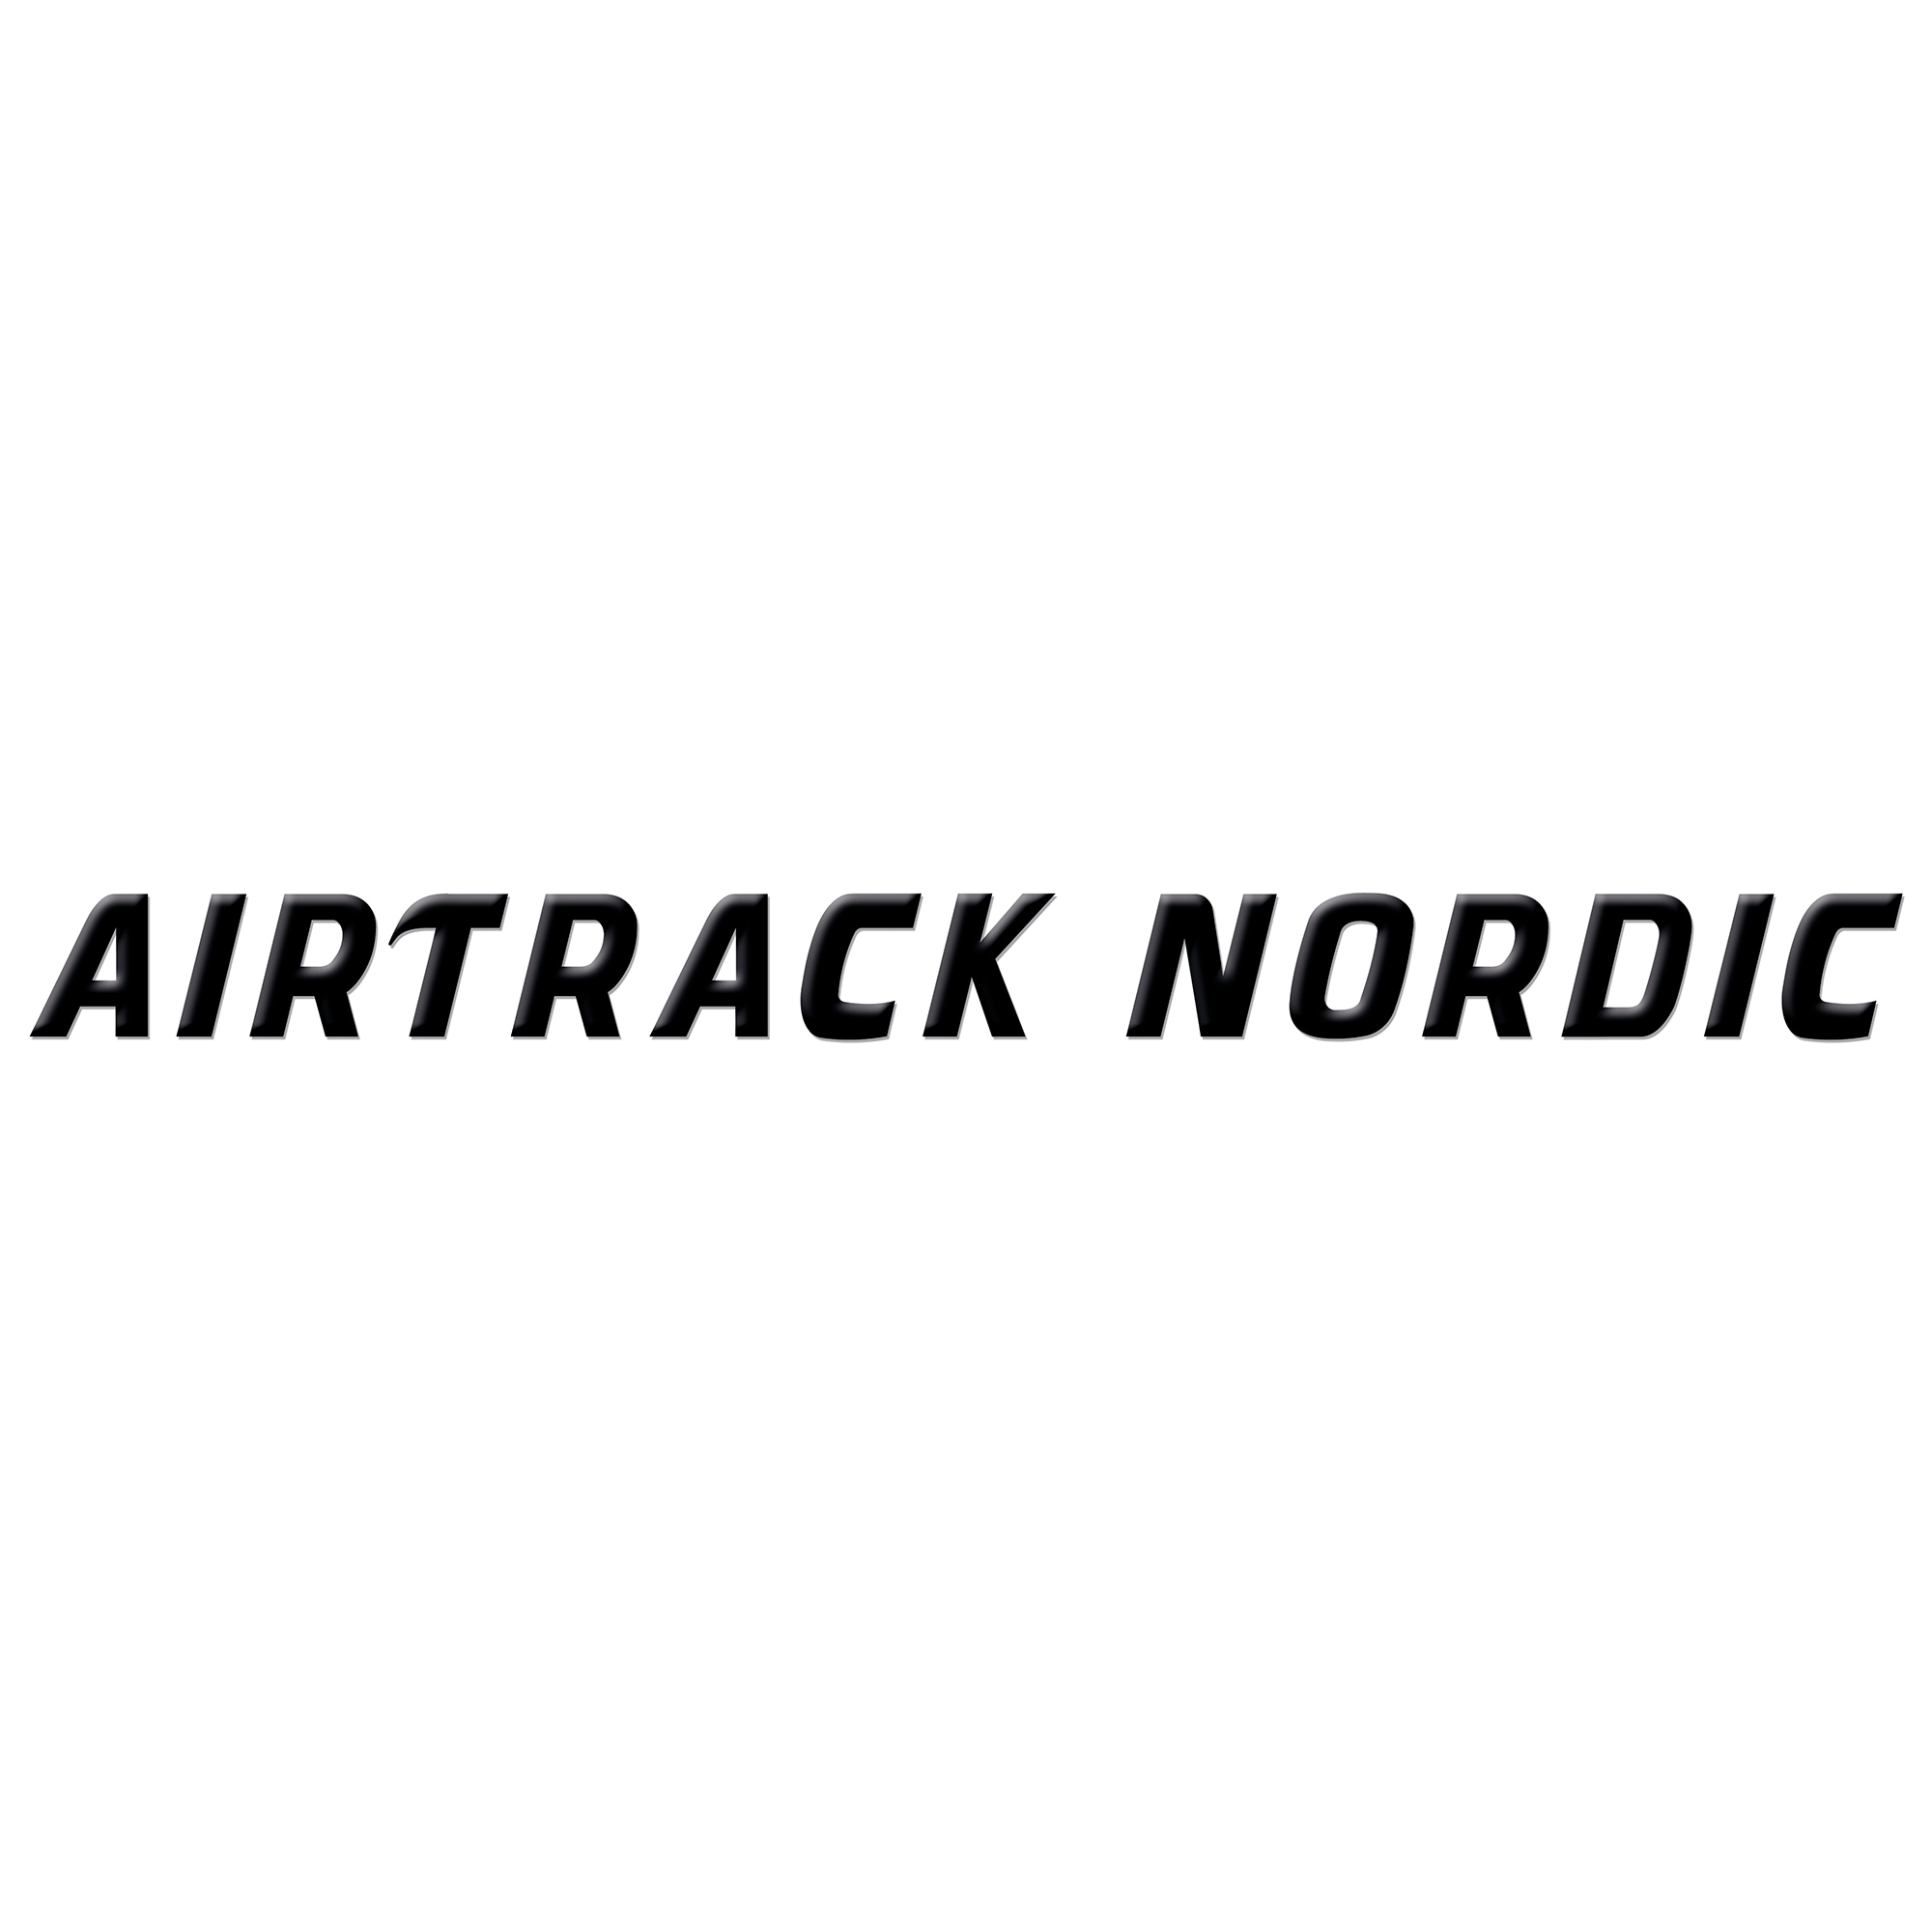 AirTrack Nordic